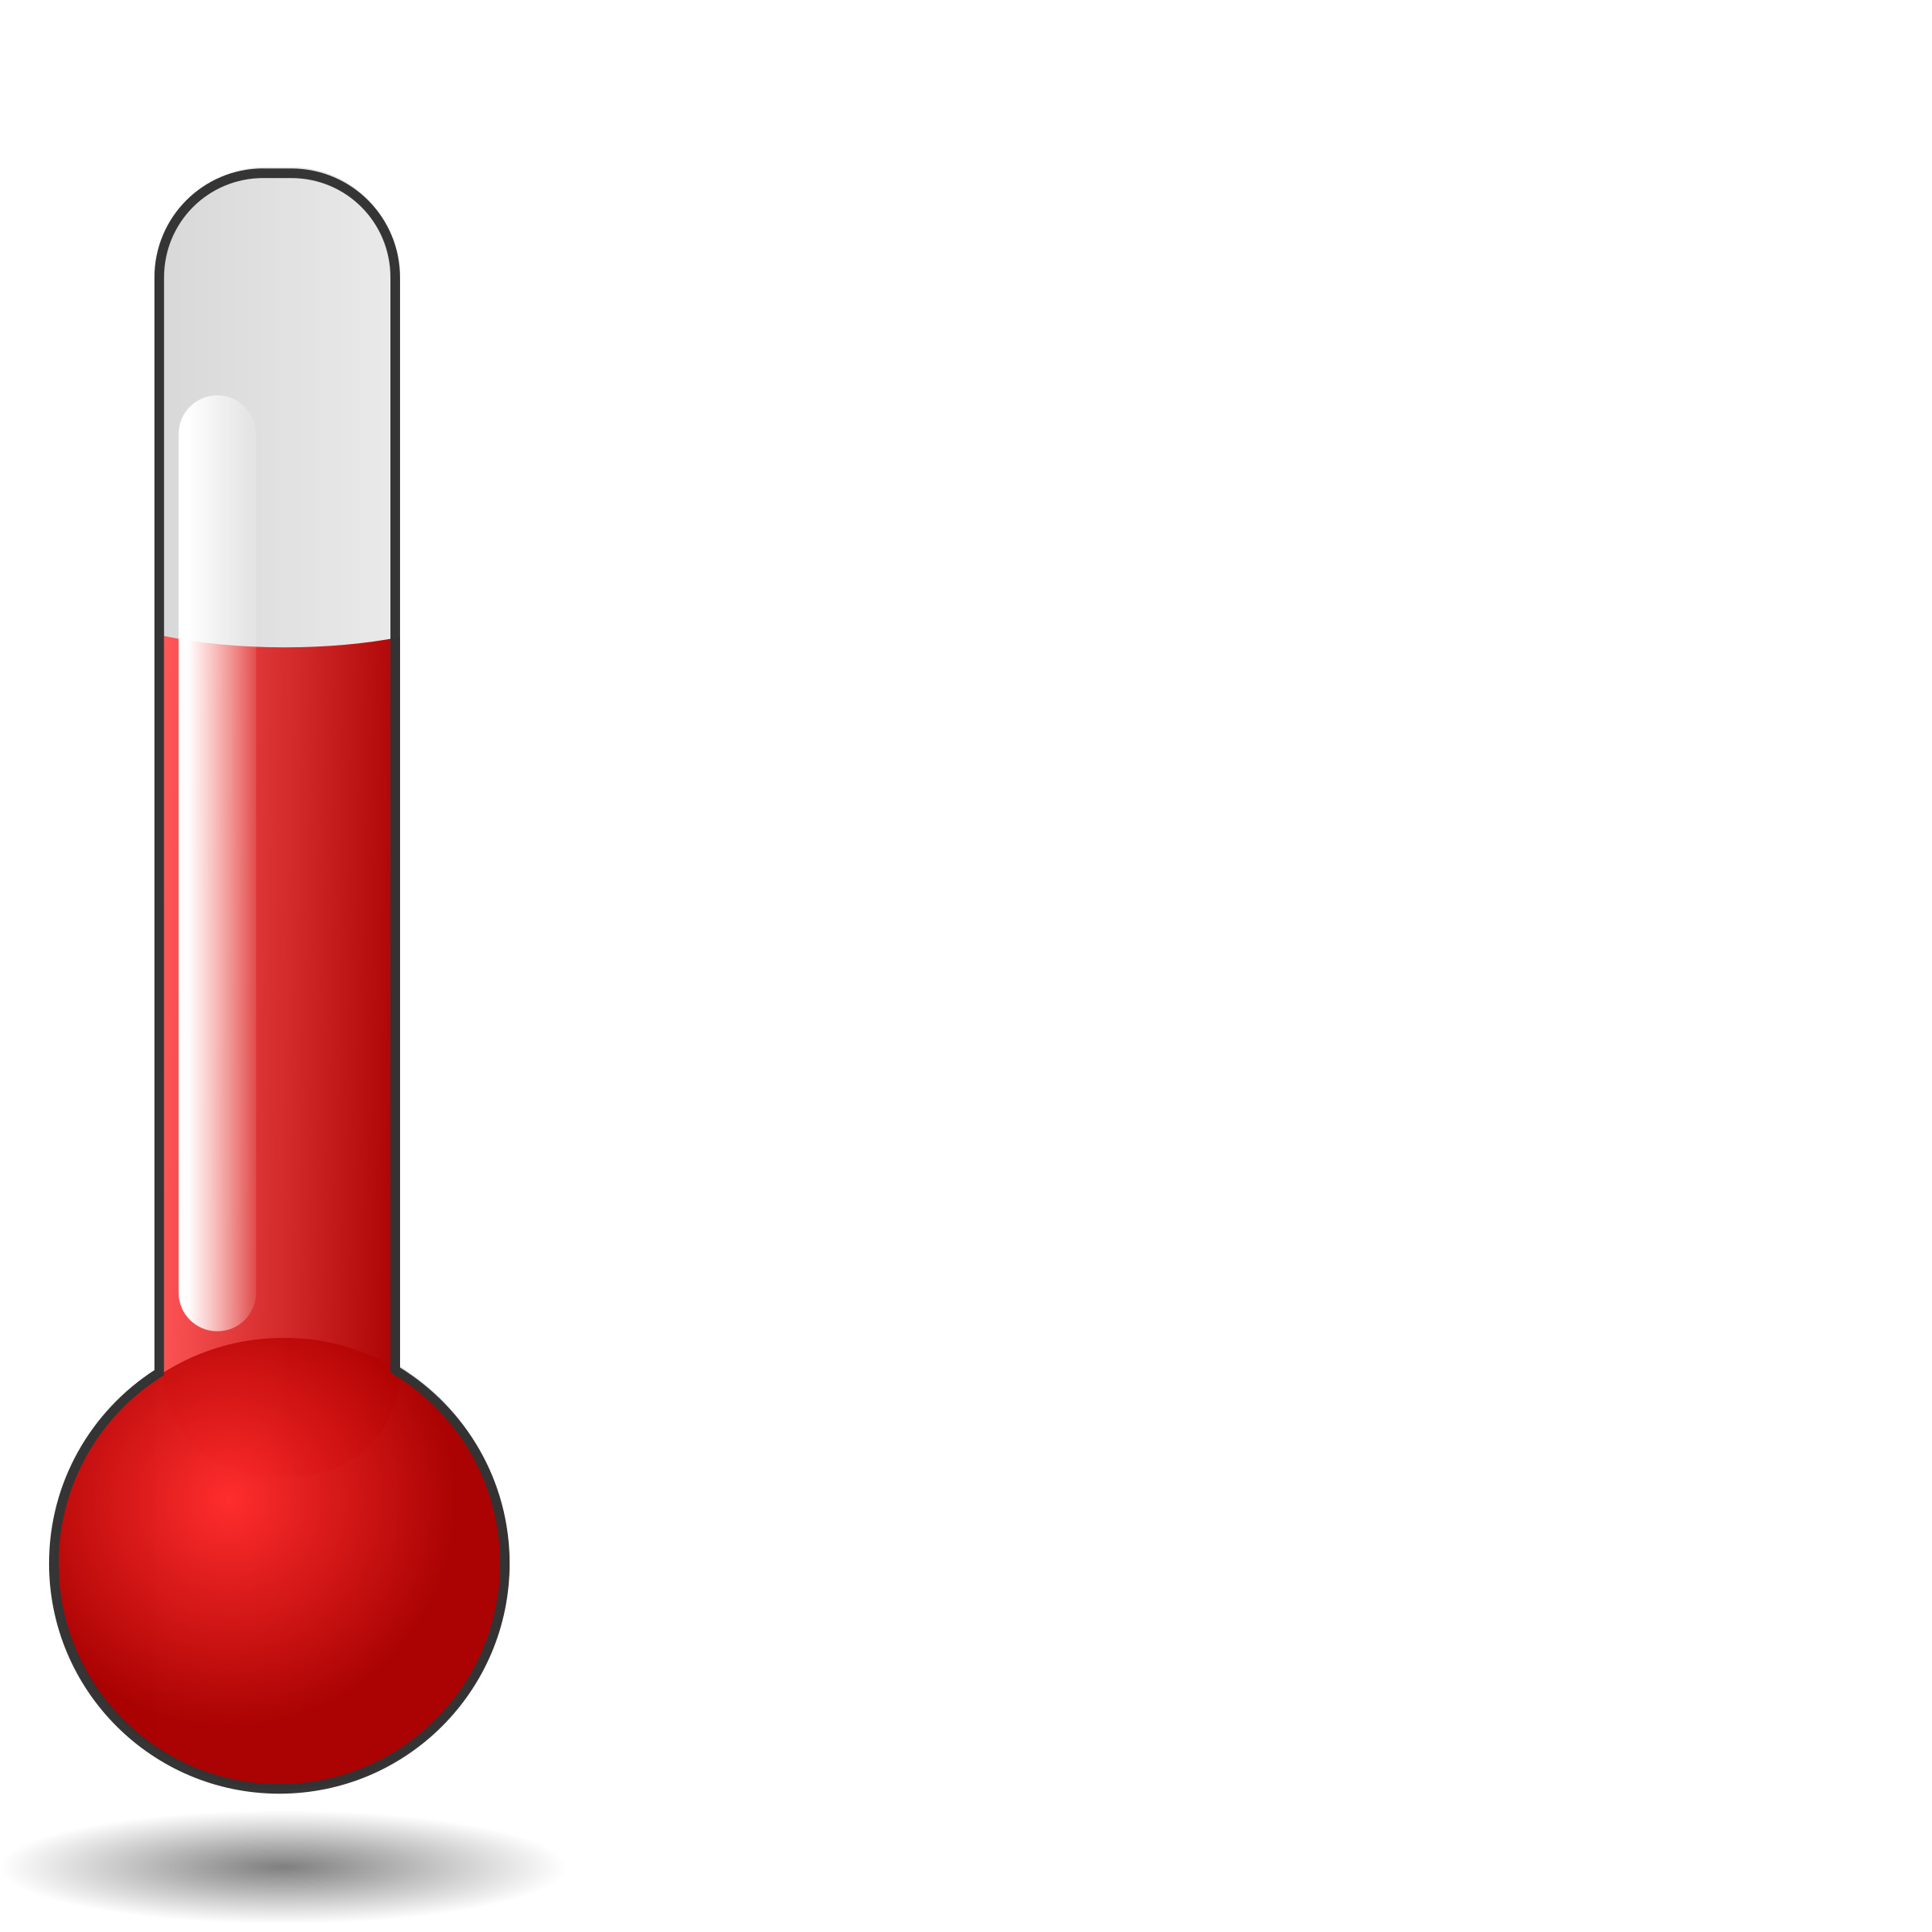 Images of hot thermometer. Heat clipart transparent background